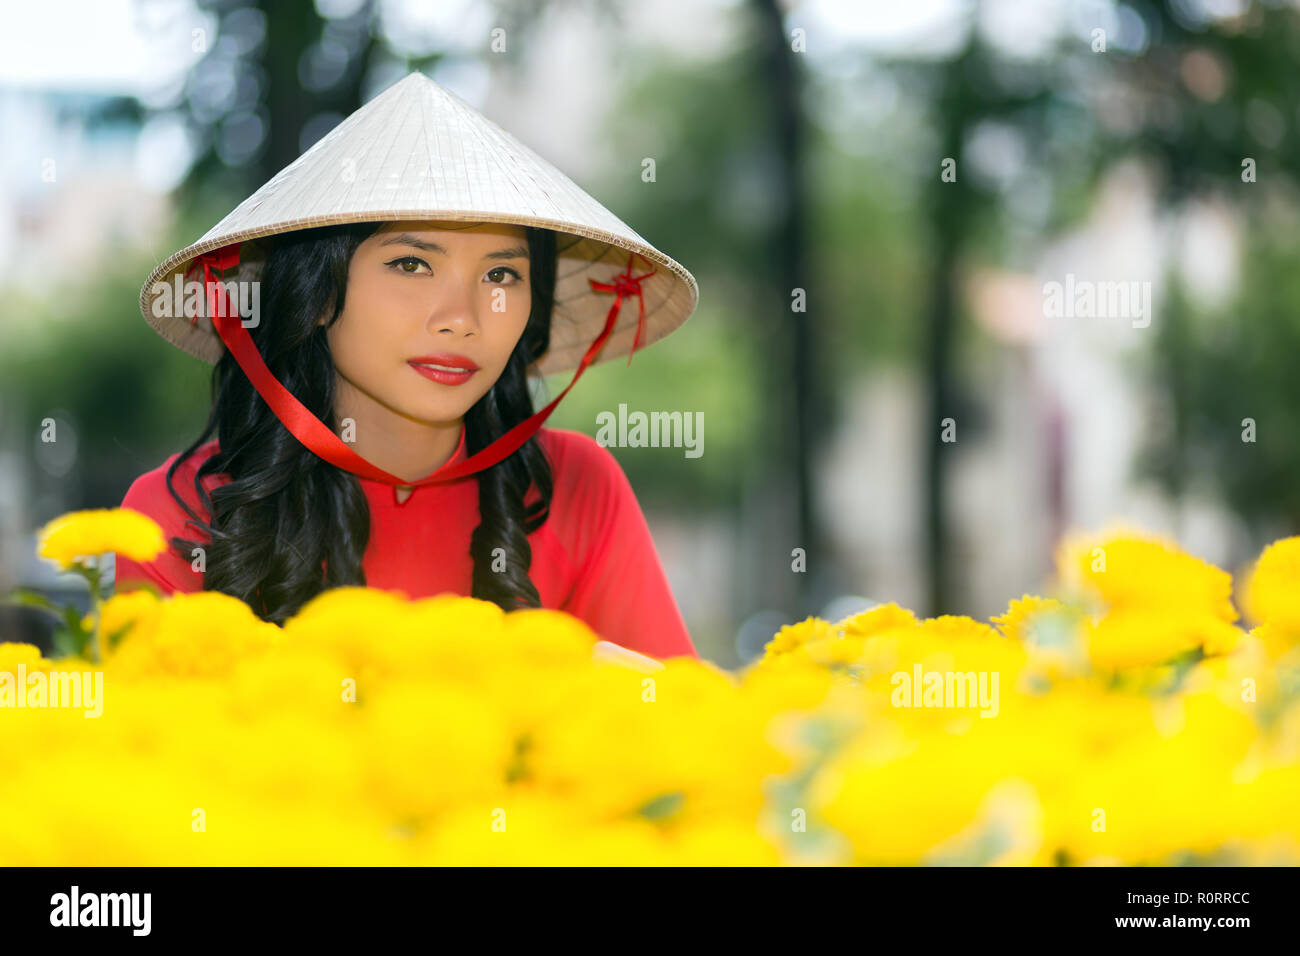 Attractive young Vietnamese woman in a traditional hat looking at the camera with a serious expression over a display of colorful vivid yellow flowers Stock Photo